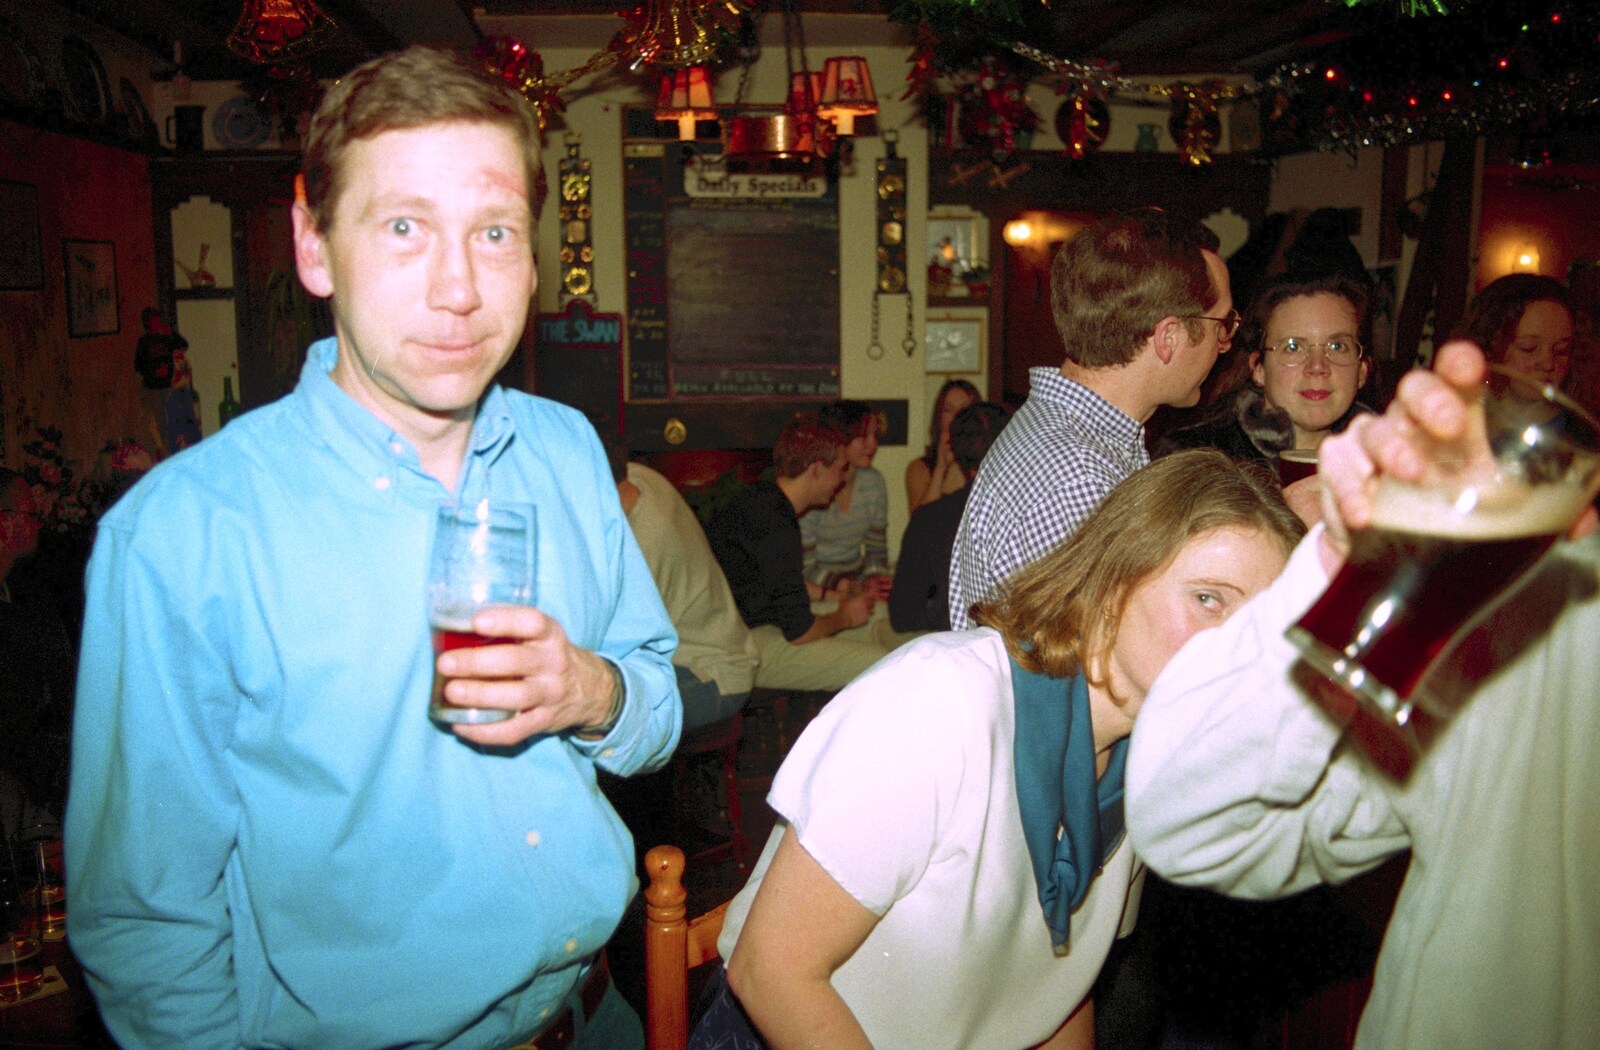 Apple looks startled as Pippa ducks out from New Year's Eve at The Swan Inn, Brome, Suffolk - 31st December 1999